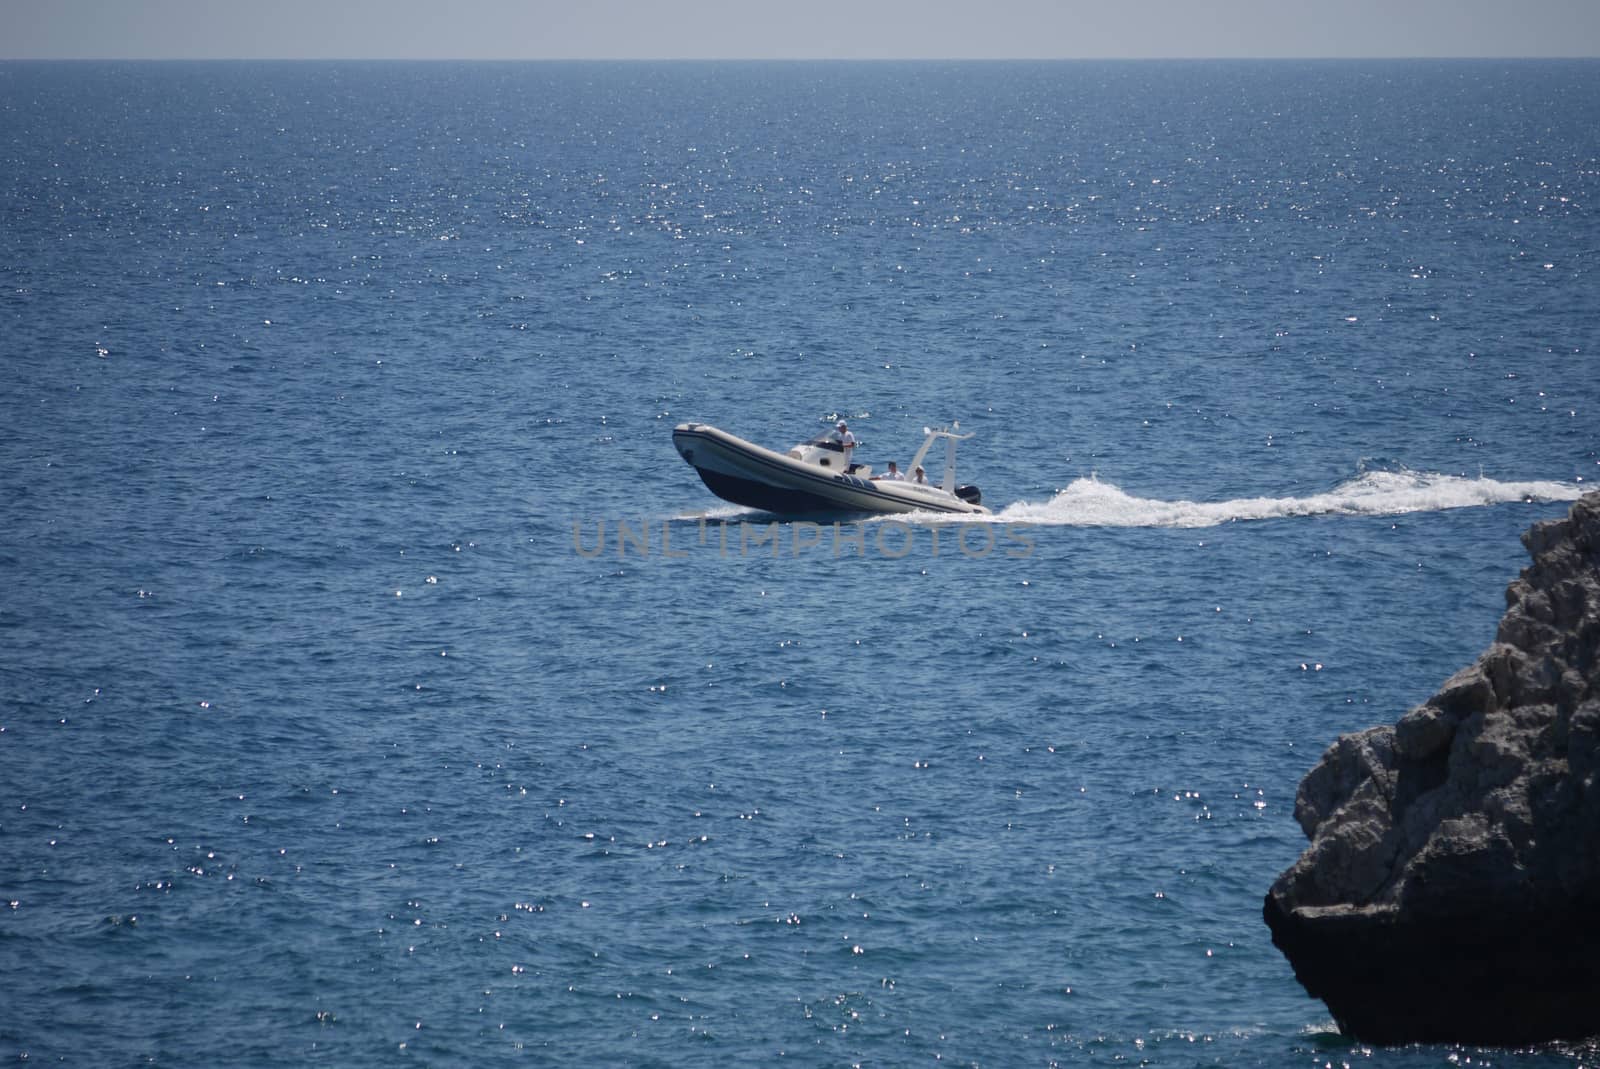 The boat is fast floating on the waves in the rays of sunlight against the background of the wide blue sea